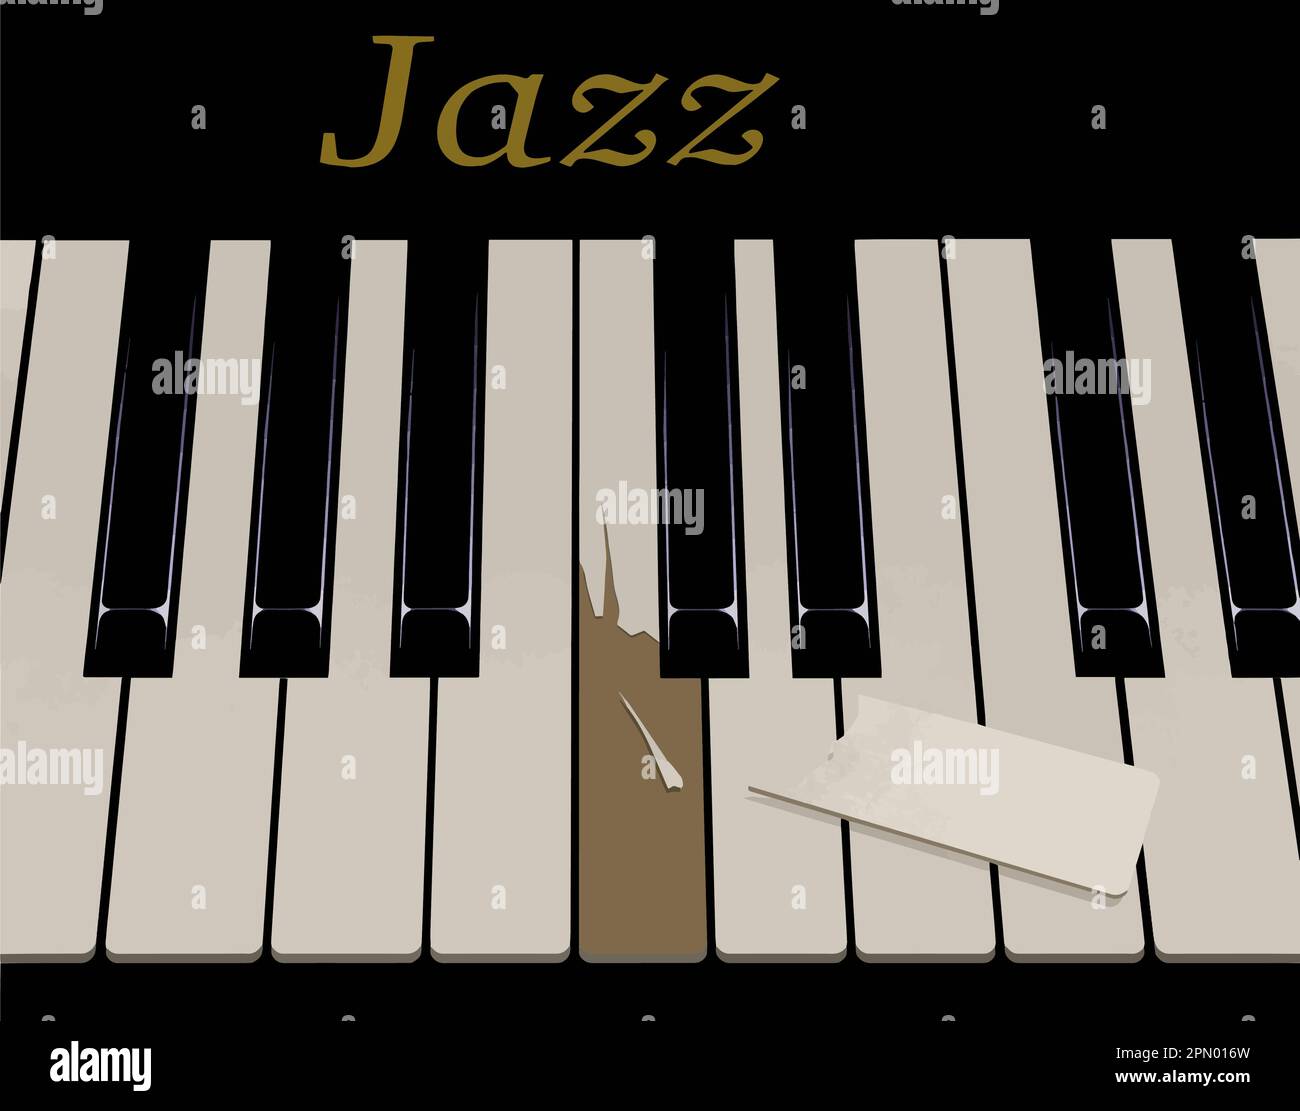 Aggressive playing of jazz music on this piano has damaged the keys in a vector tribute to lively jazz music. Stock Vector